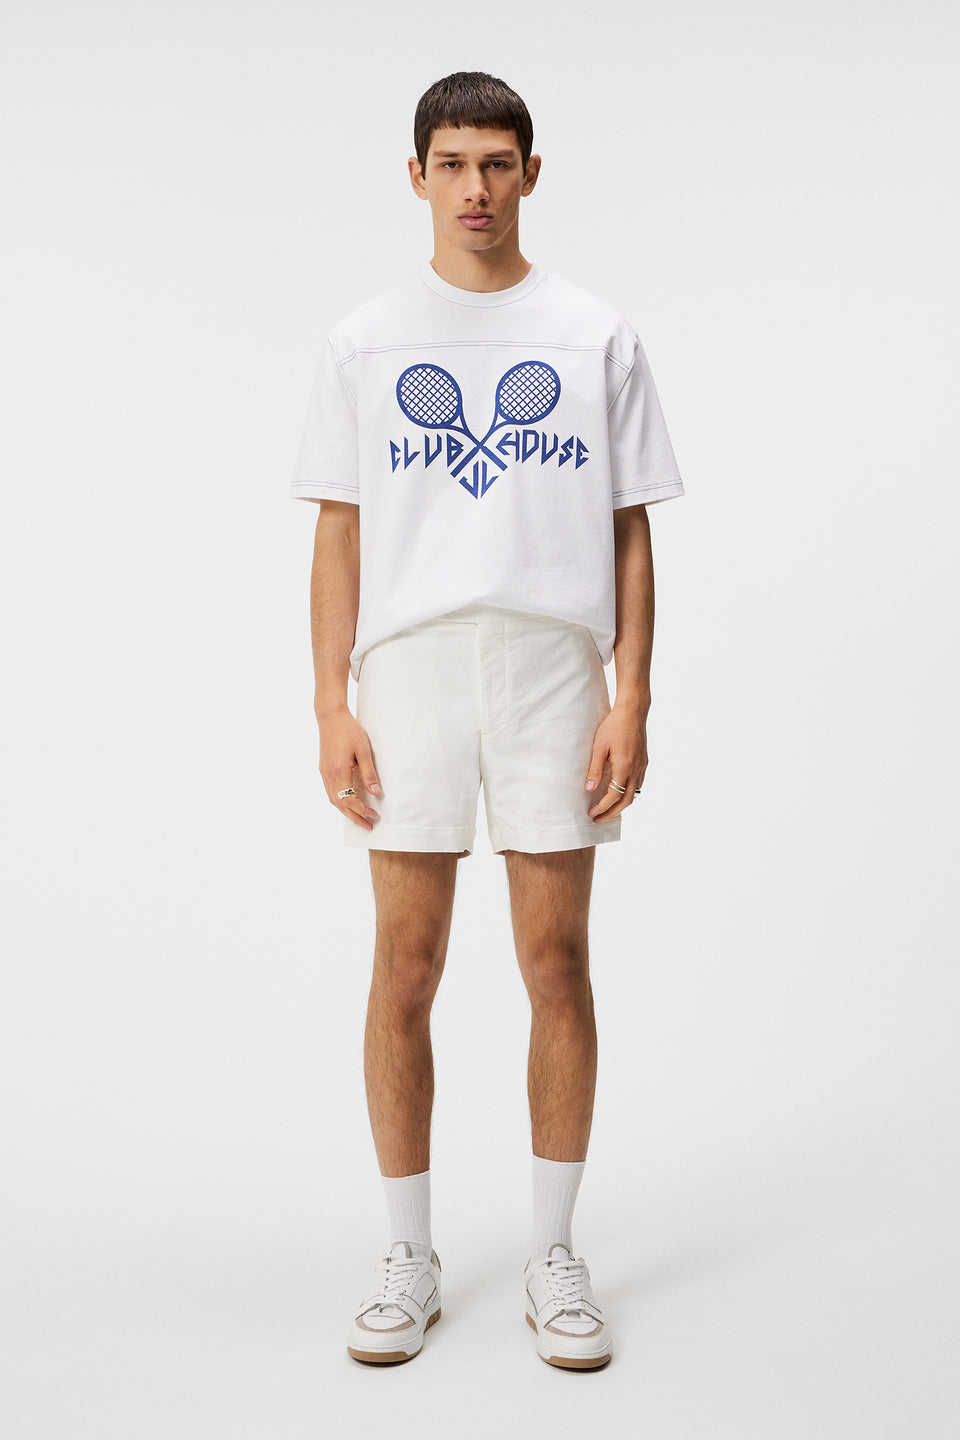 Andy Tennis Shorts / White